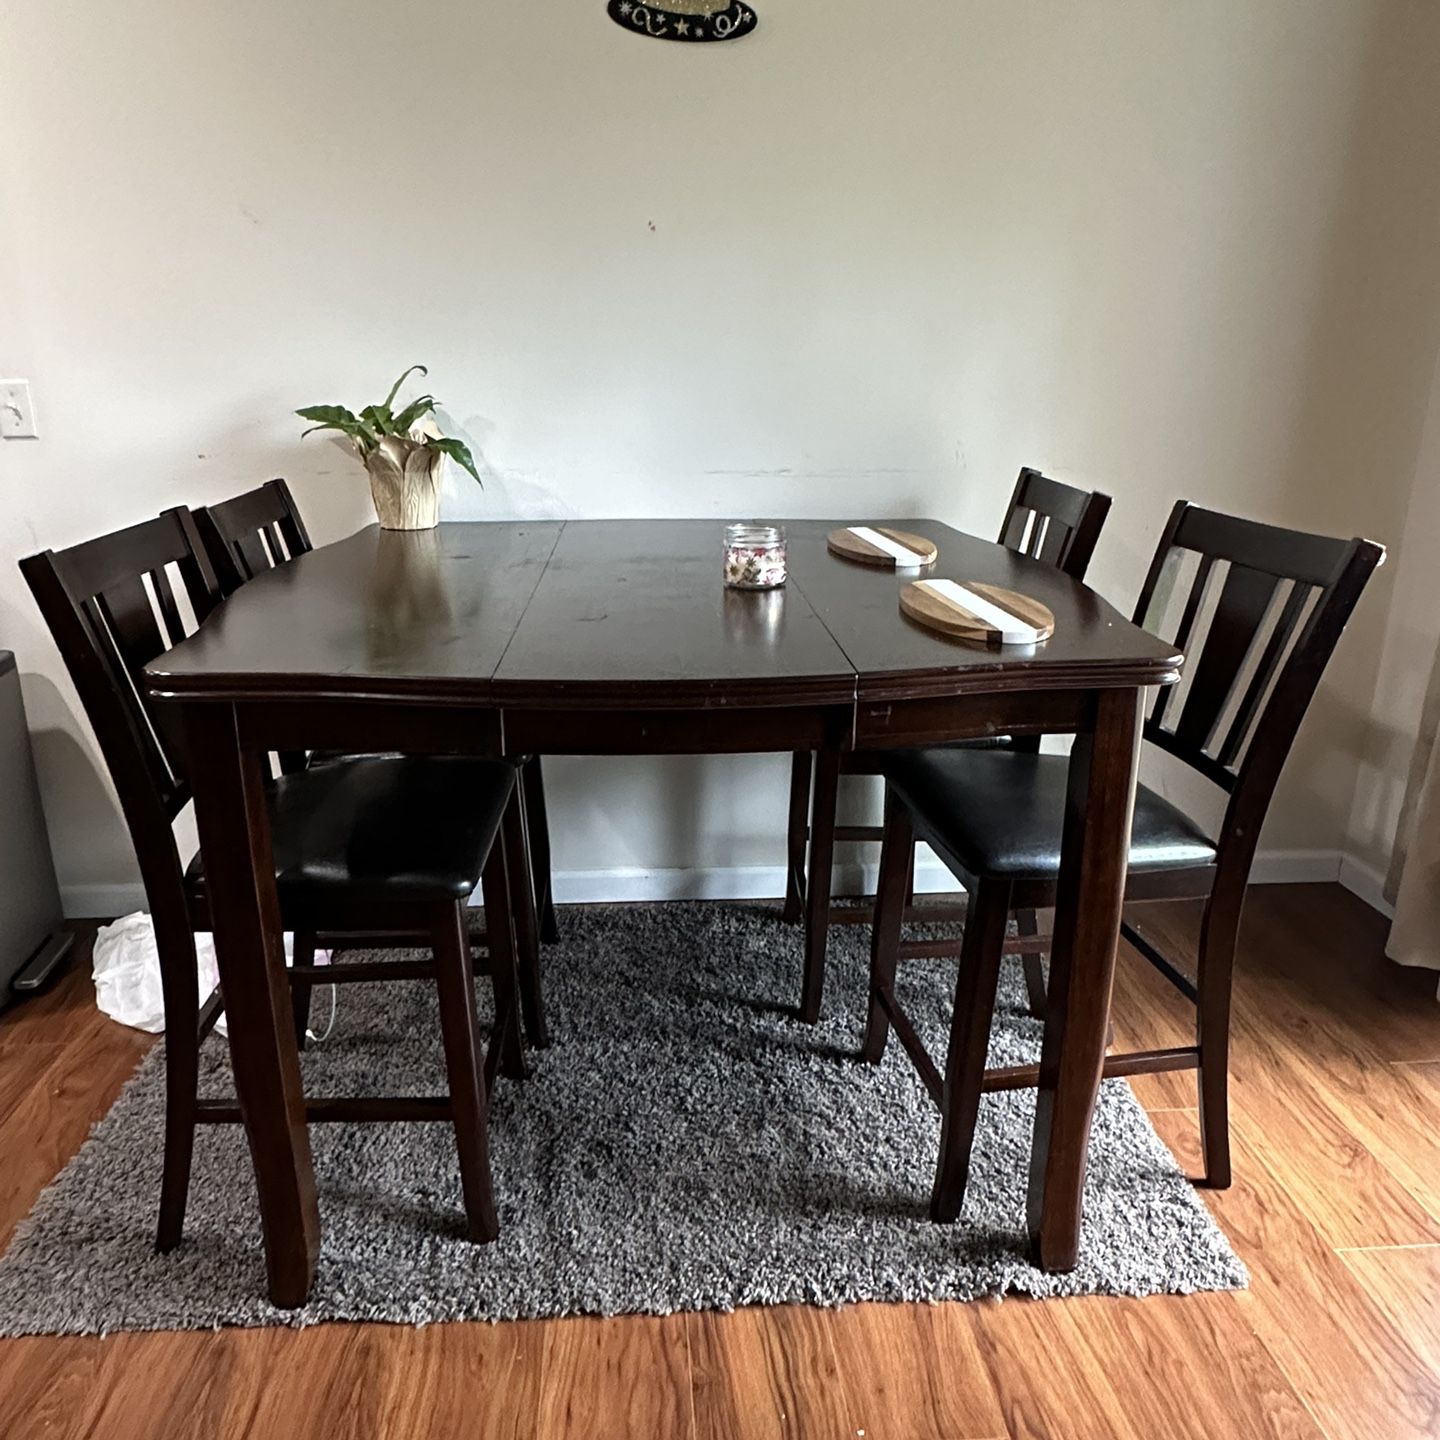 Solid Wood Dining + Free Wooden Crib